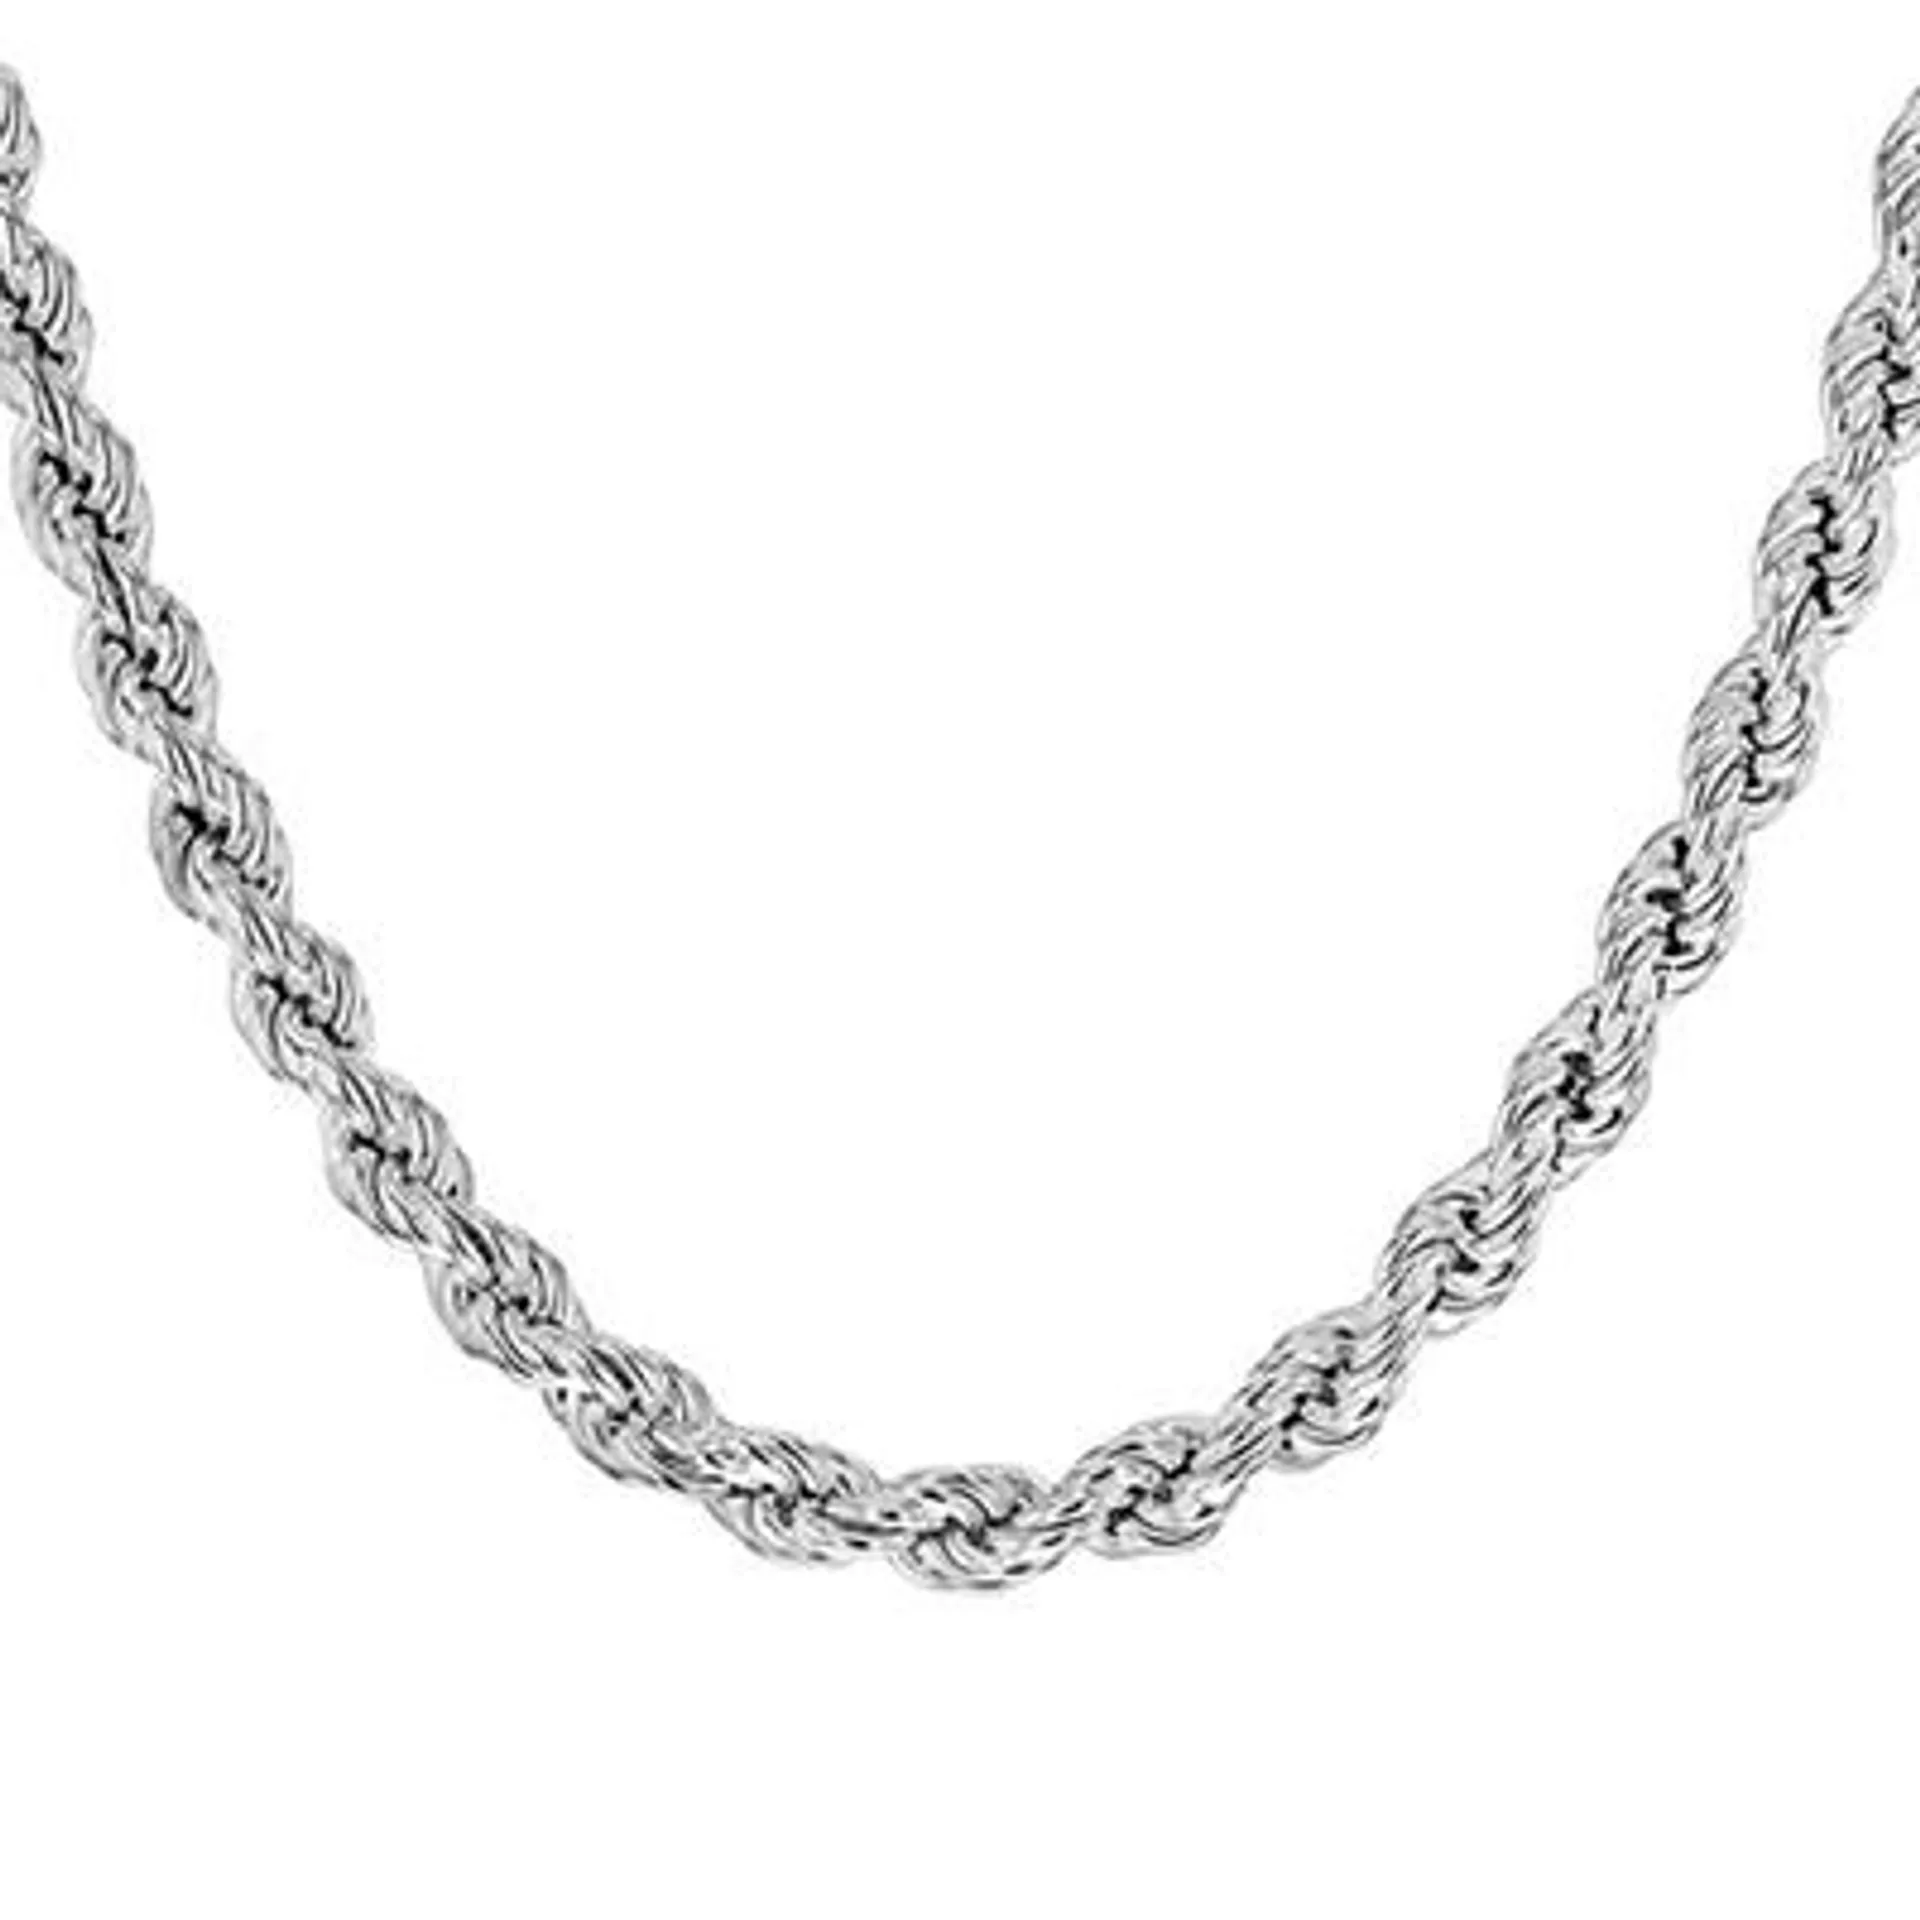 Faith & Brown Italian Crafted 4.2mm Rope Sterling Silver Necklace - 24 inch